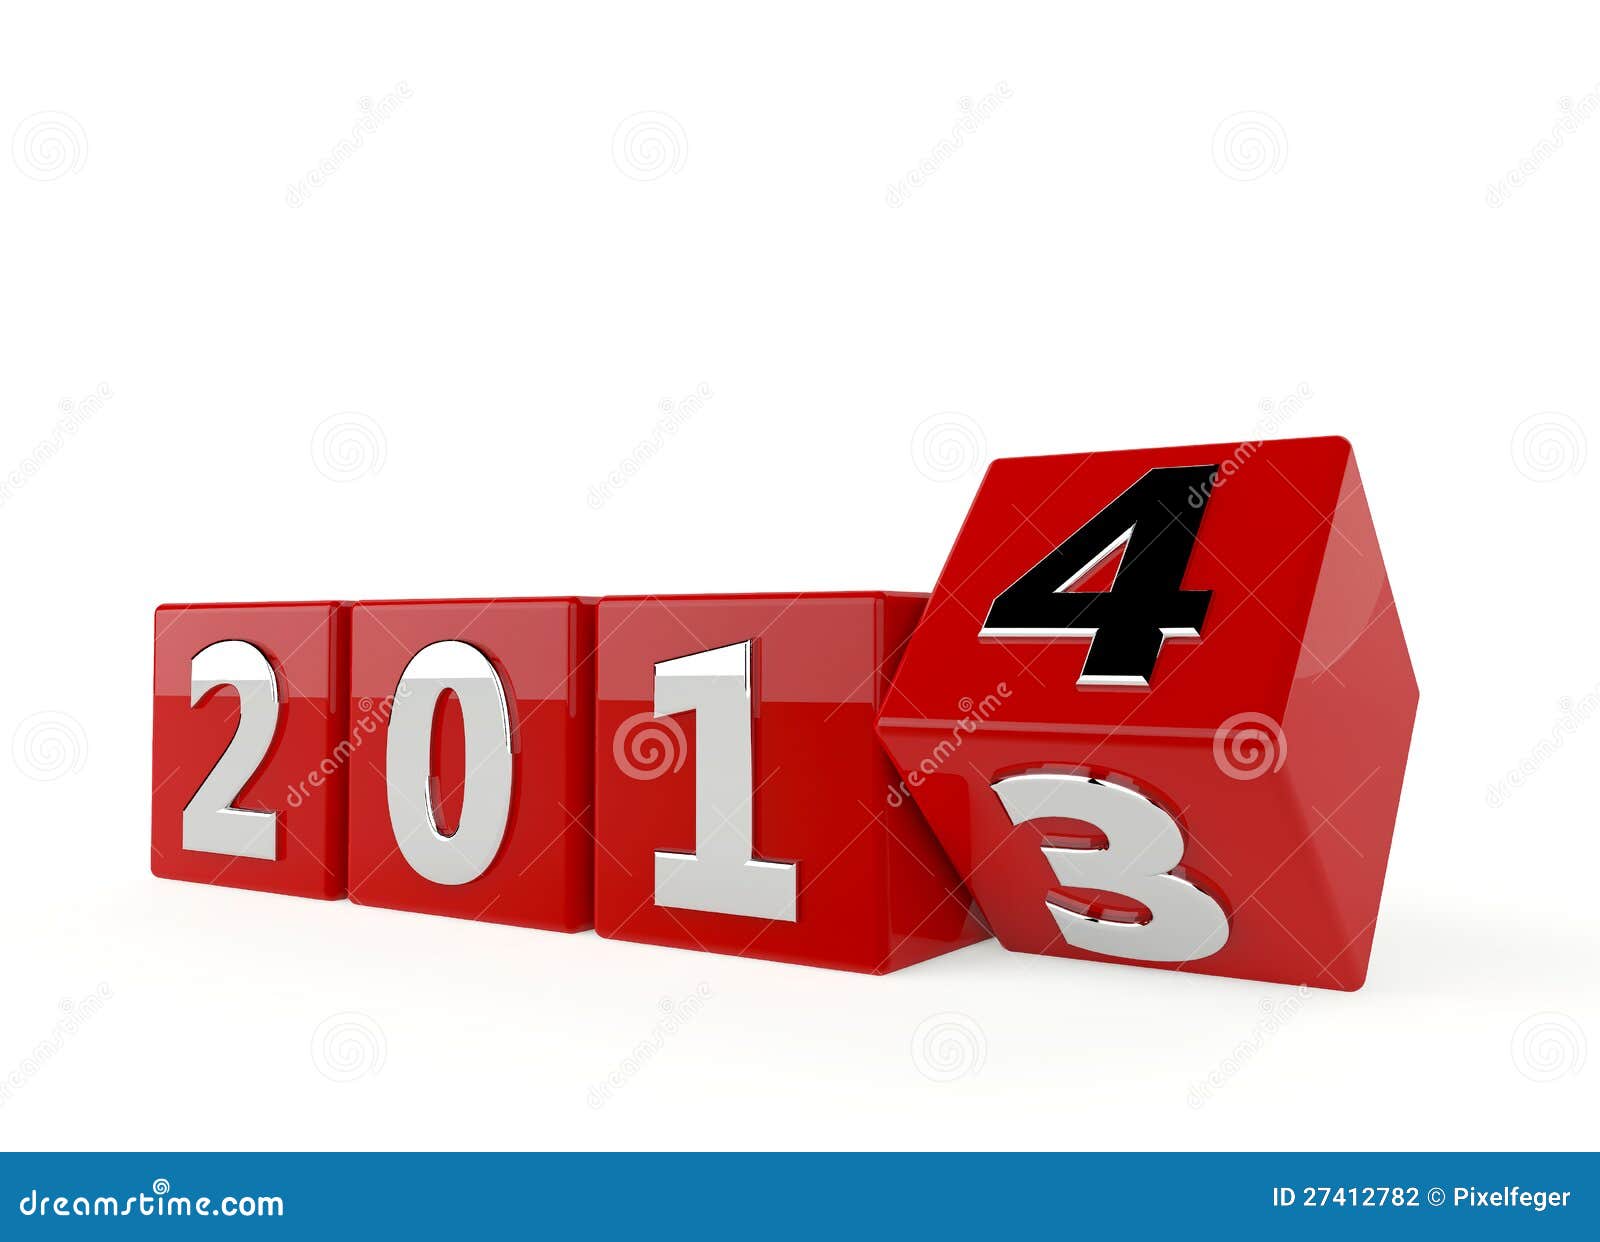 2014 Year In 3d Stock Photography - Image: 27412782